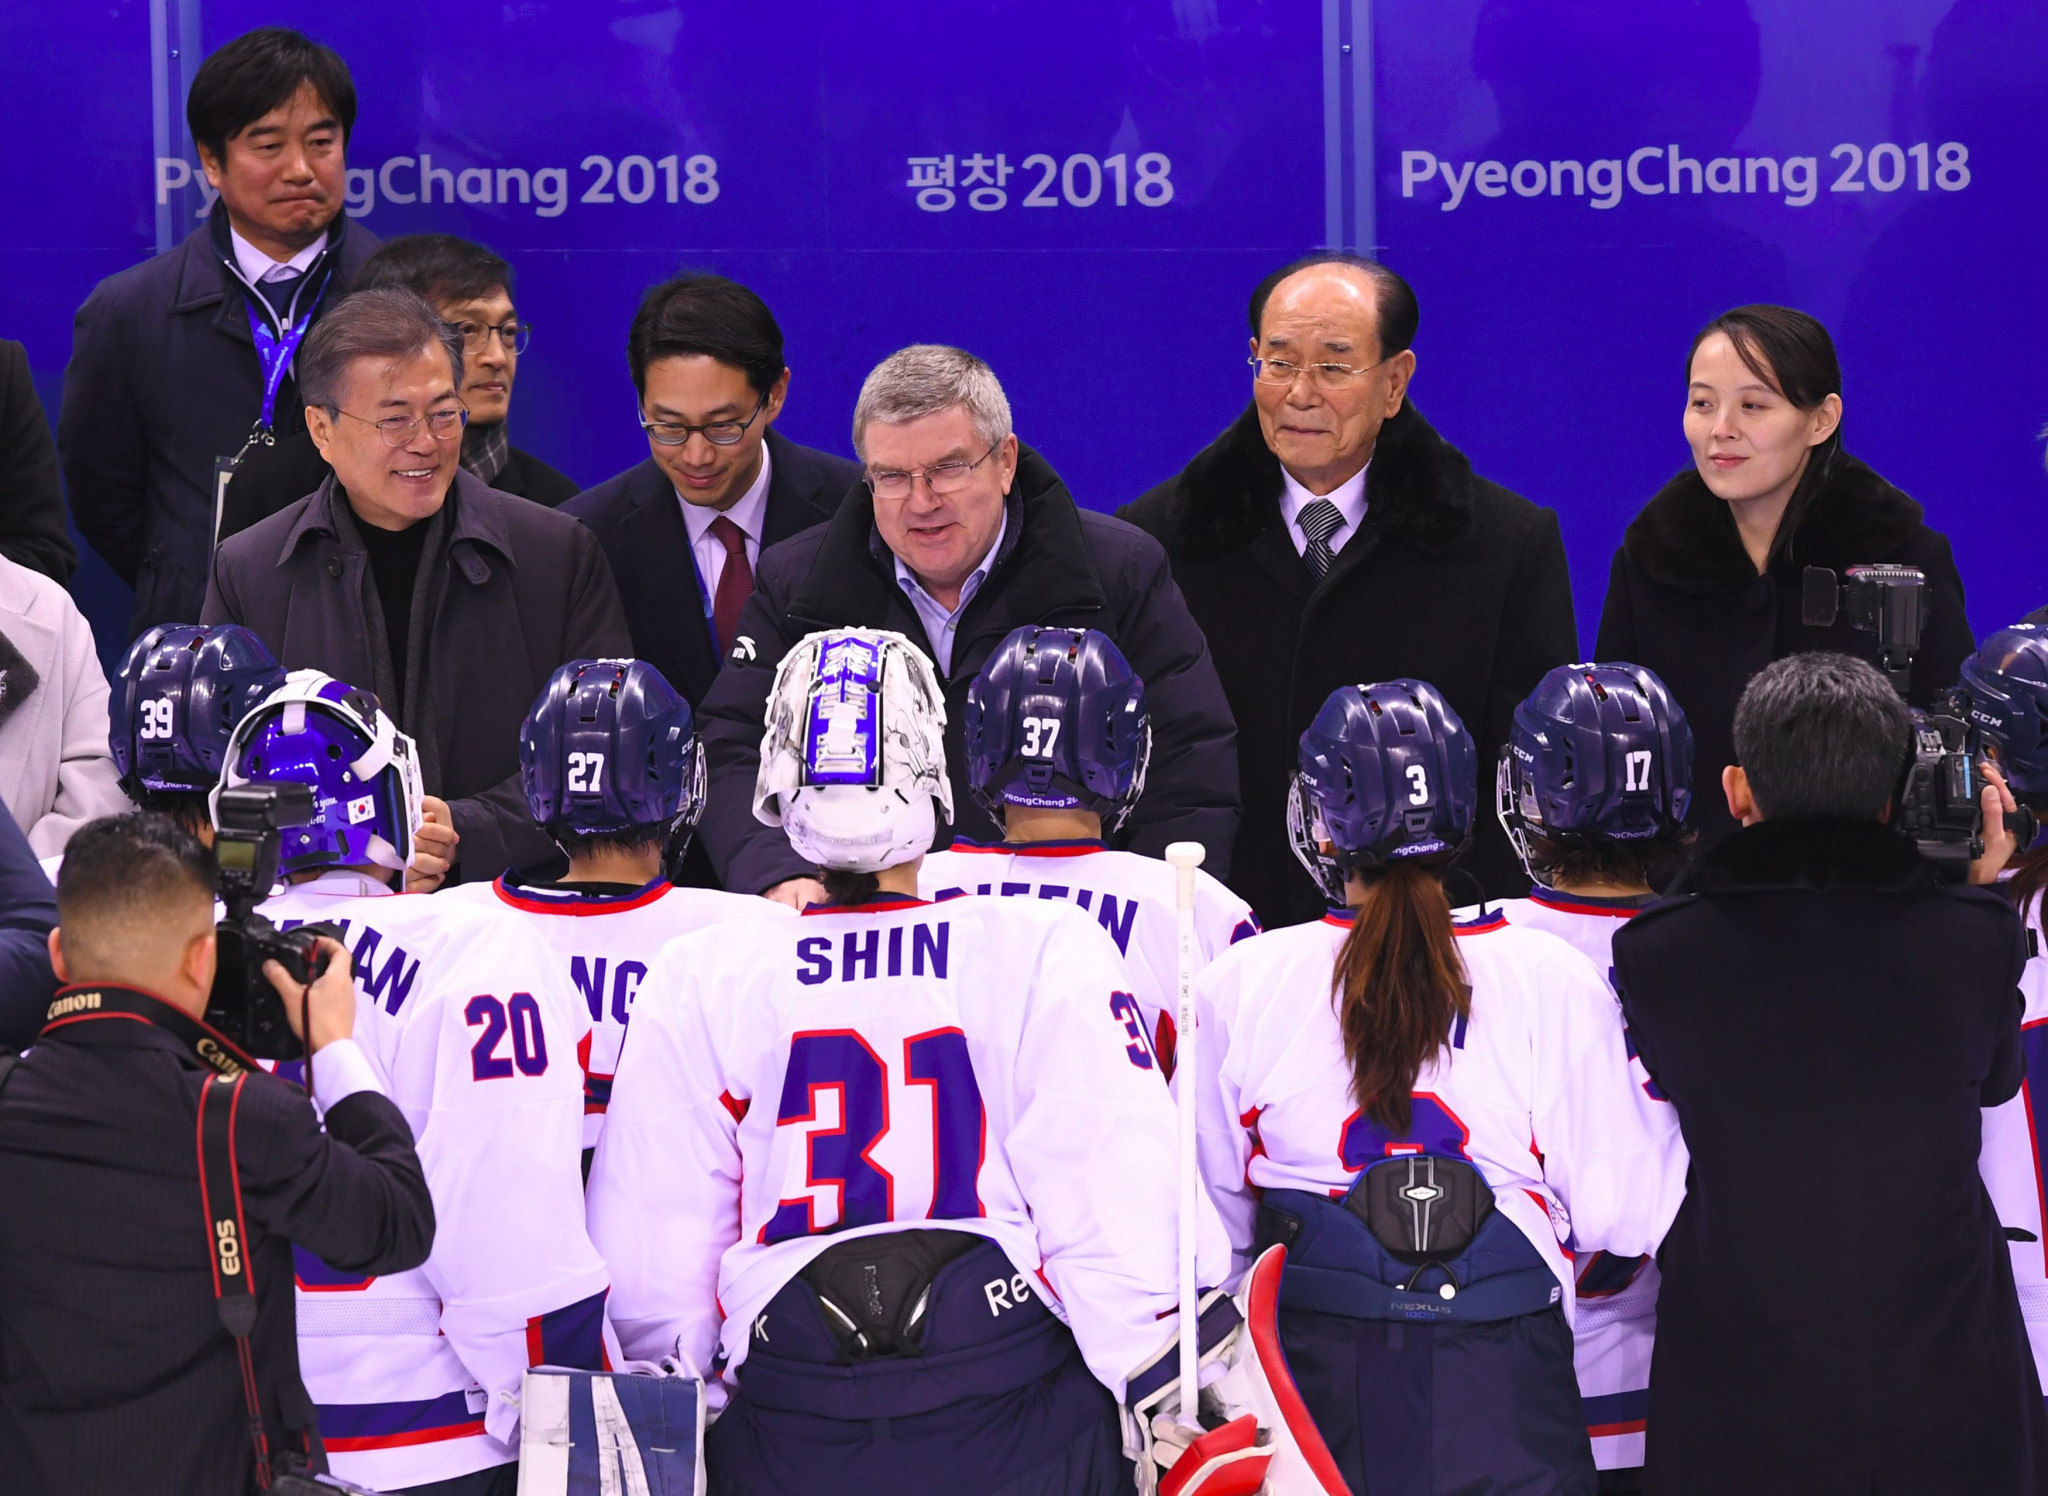 Members of the unified Korean women's ice hockey team are greeted by IOC President during Pyeongchang 2018 ©Getty Images